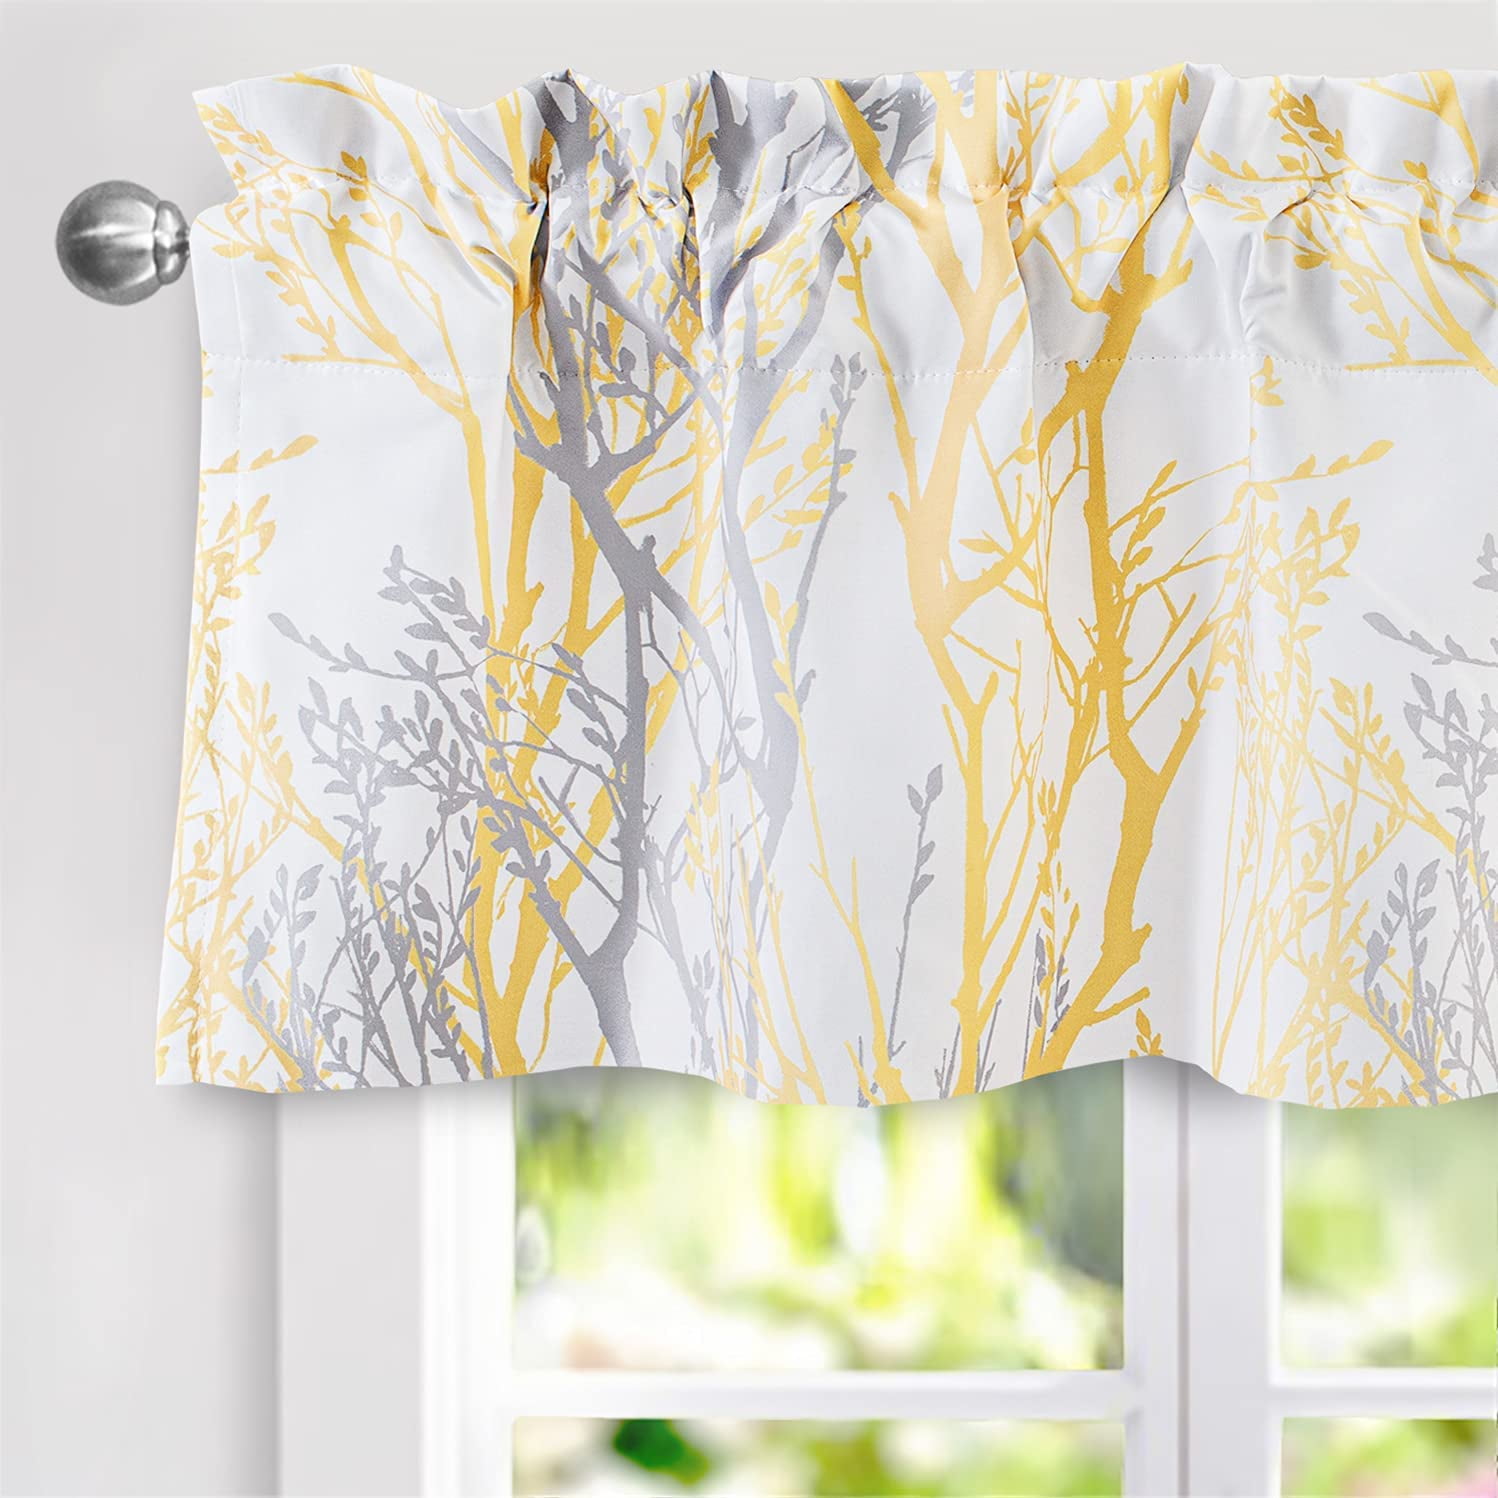 DriftAway Tree Branch Abstract Ink Printing Lined Thermal Insulated Window Curtain Valance Rod Pocket 52 Inch by 24 Inch Plus 2 Inch Header Silver Gray 1 Pack 